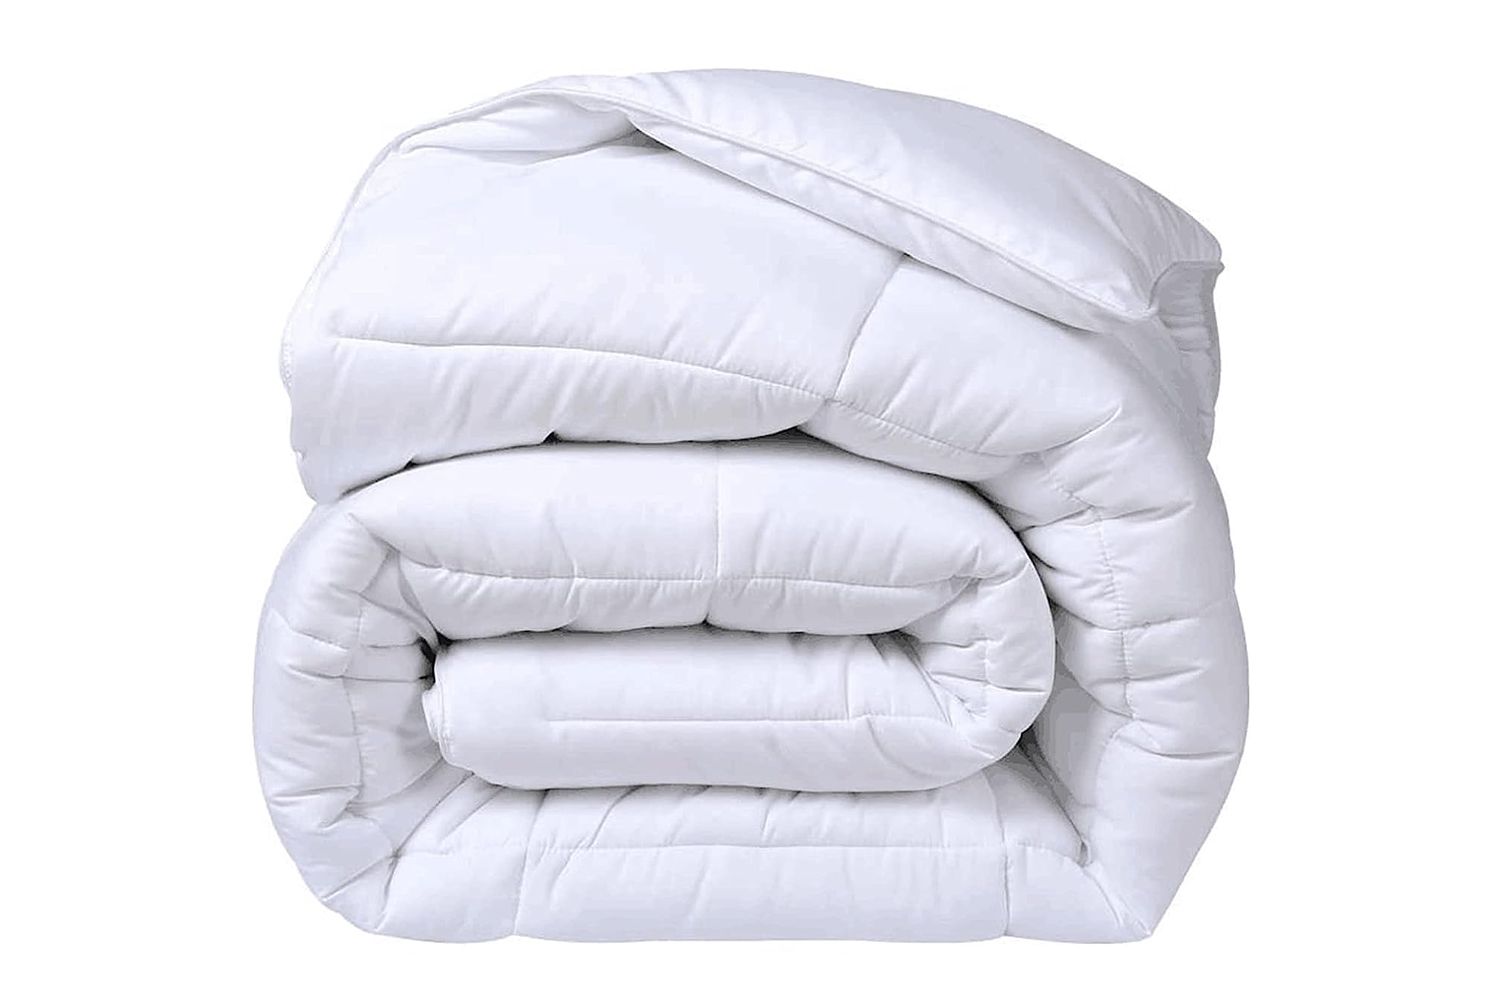 Amazon COHOME Cooling Down Alternative Comforter